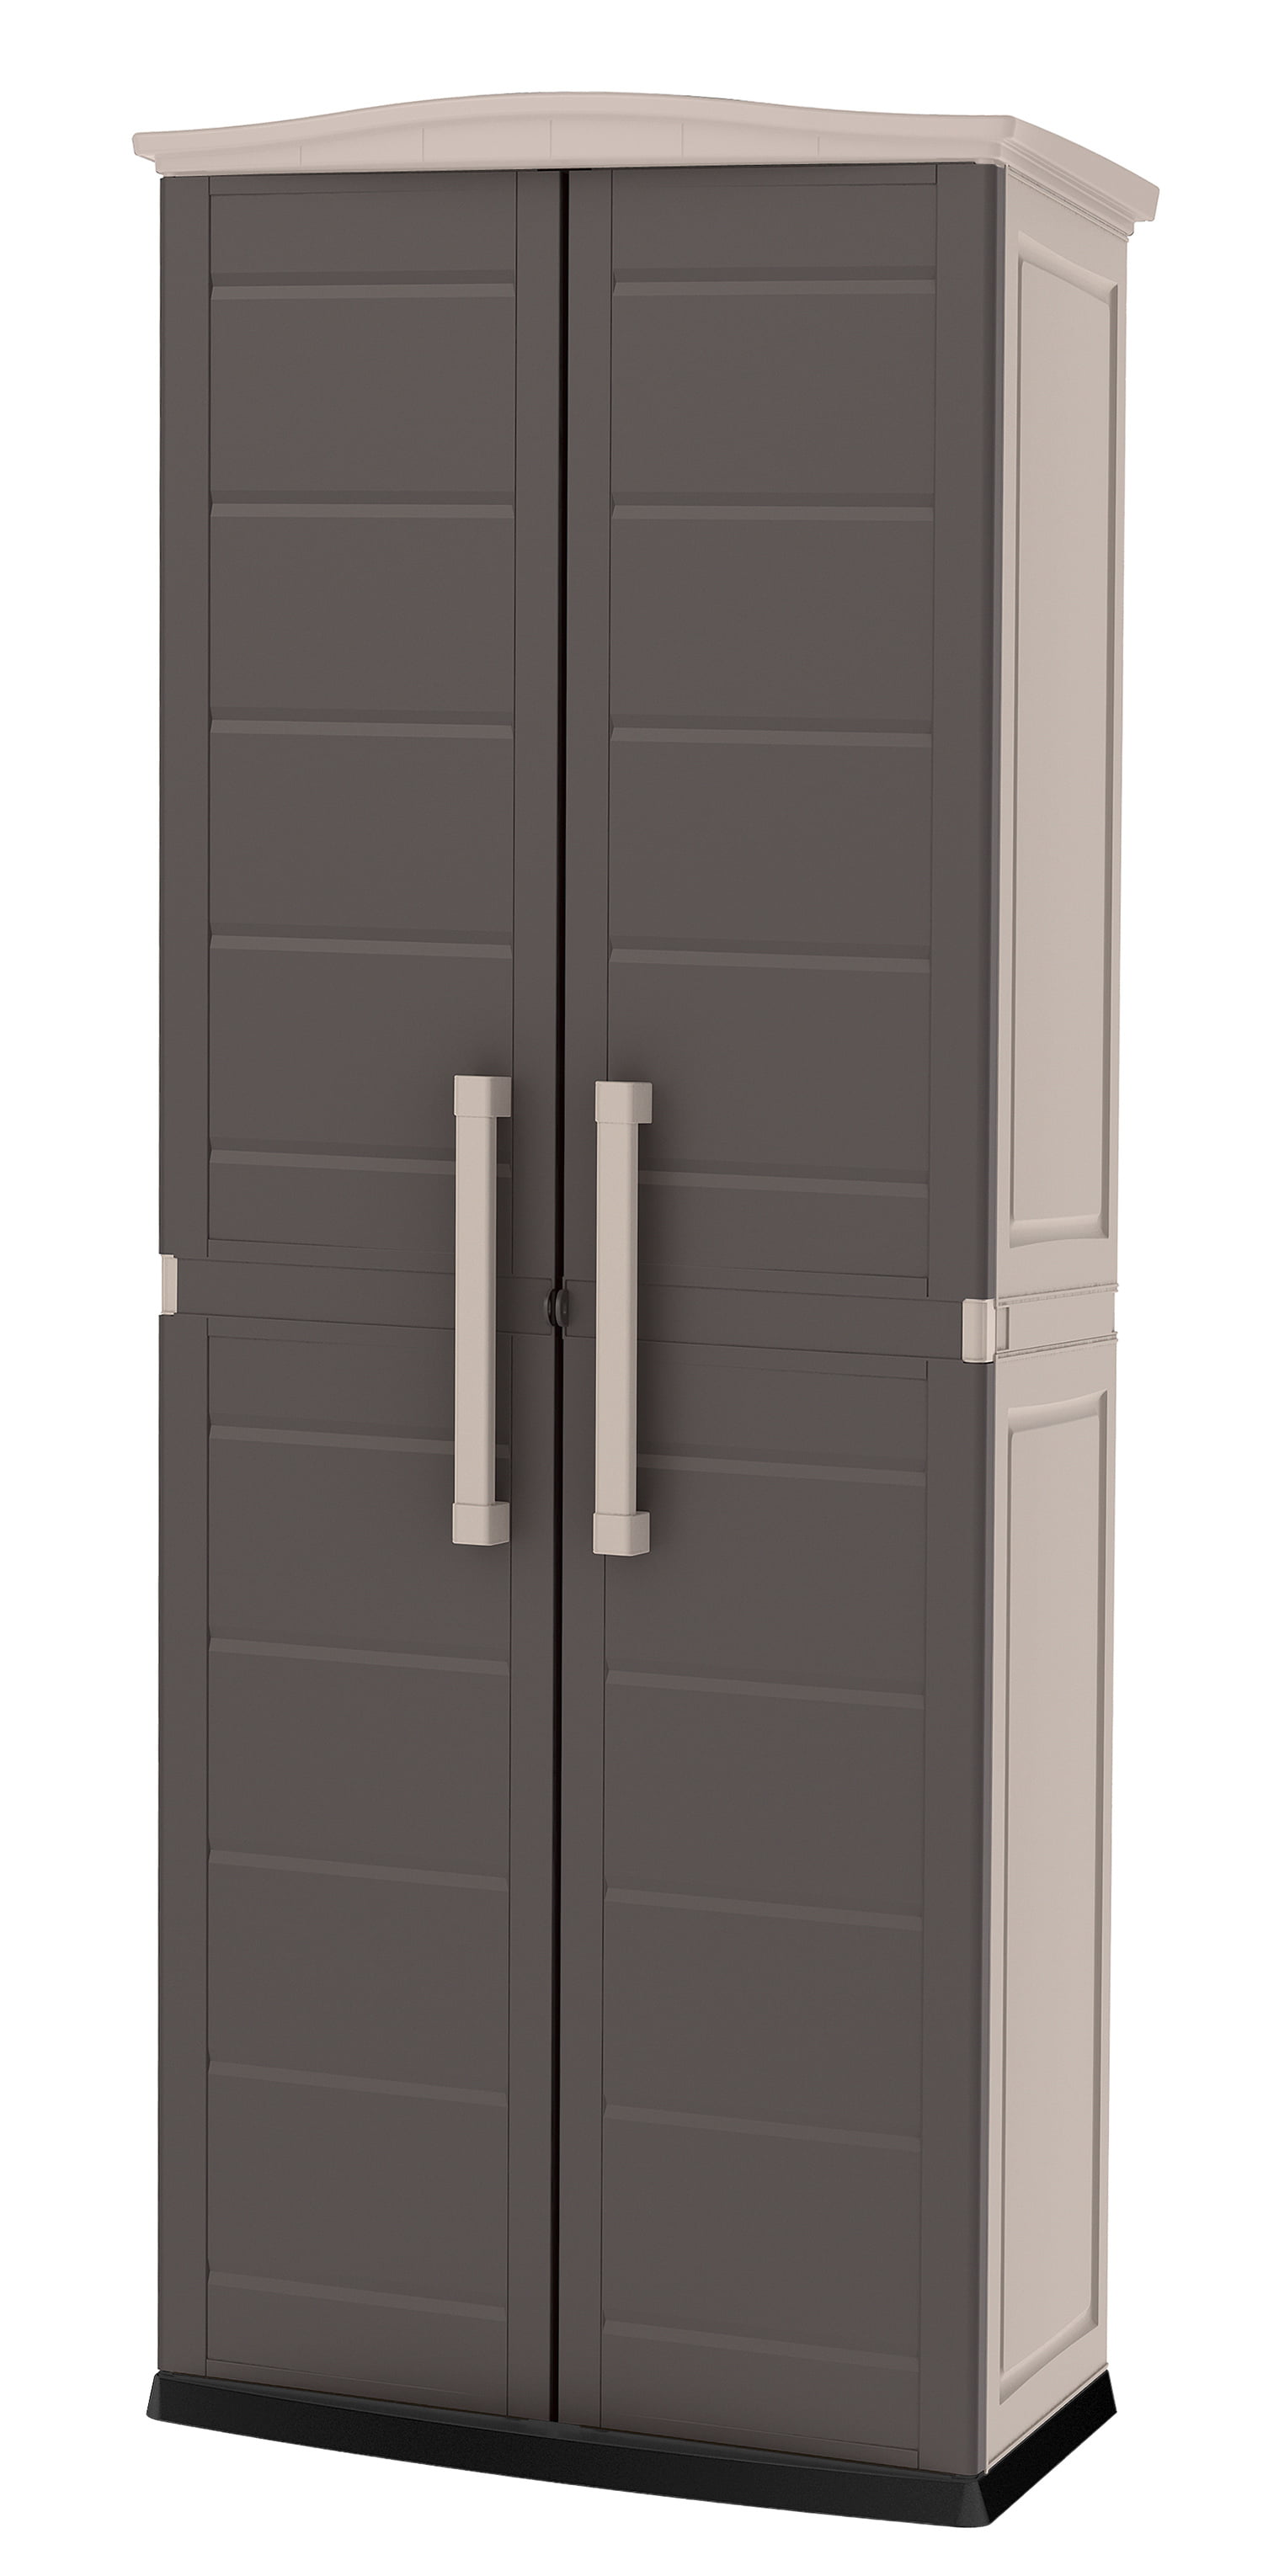 Keter Boston Tall Indoor/Outdoor Storage Utility Cabinet, Brown